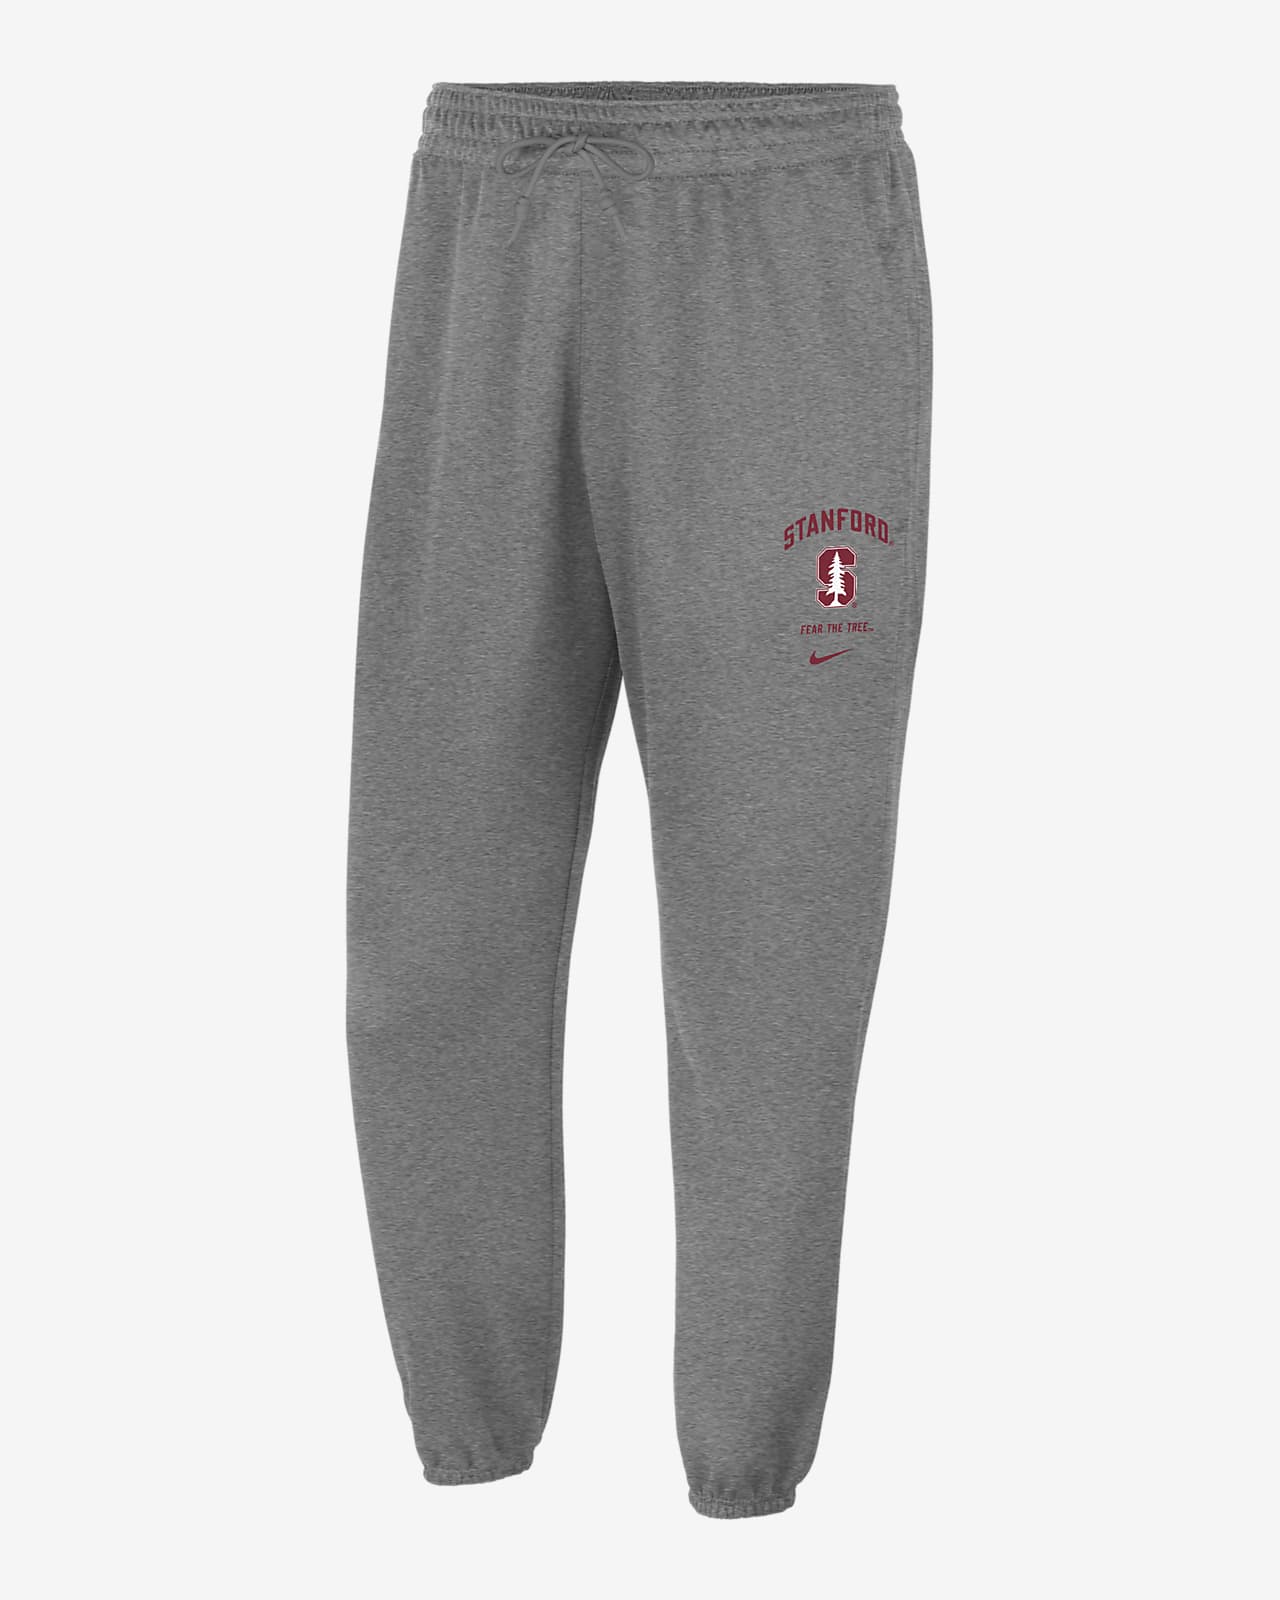 Stanford Standard Issue Men's Nike College Joggers